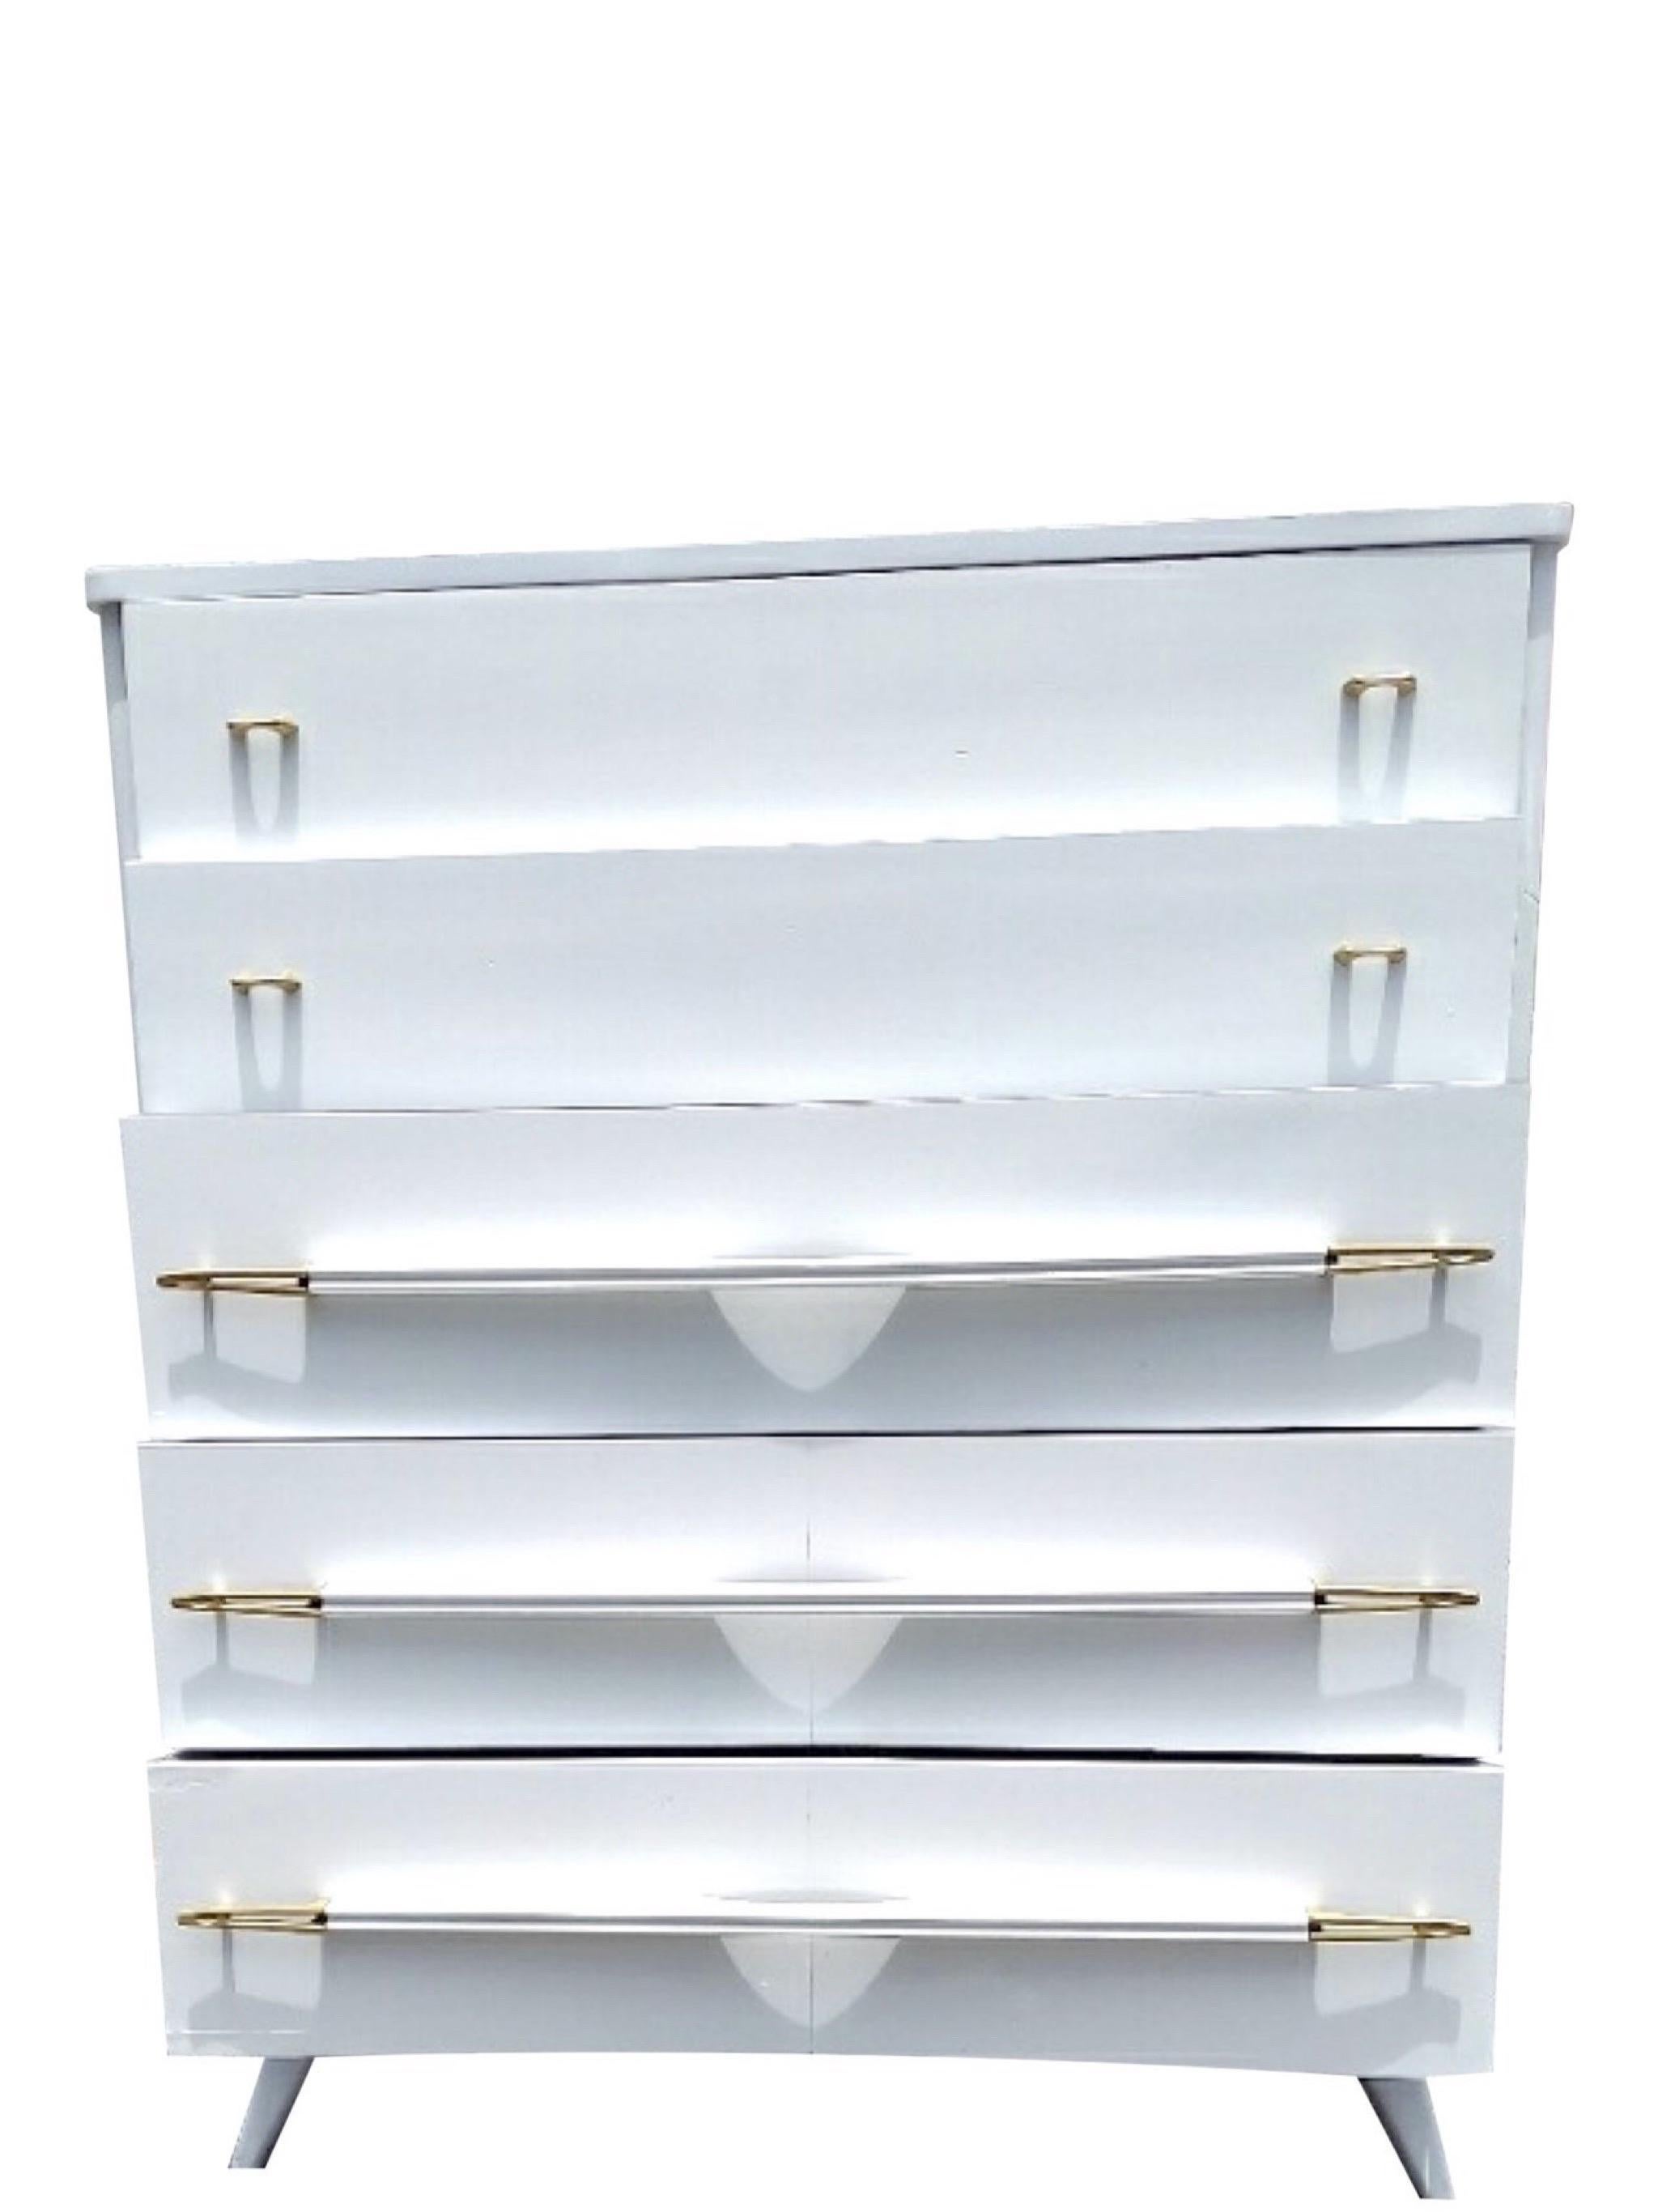 Vintage Atomic White Lacquered With Brass Highboy
Funky splayed legs, 5 drawers with wooden handles that have the most interesting brass accents. The top drawers have brass pulls and it all just pops against the high gloss white lacquer. I am